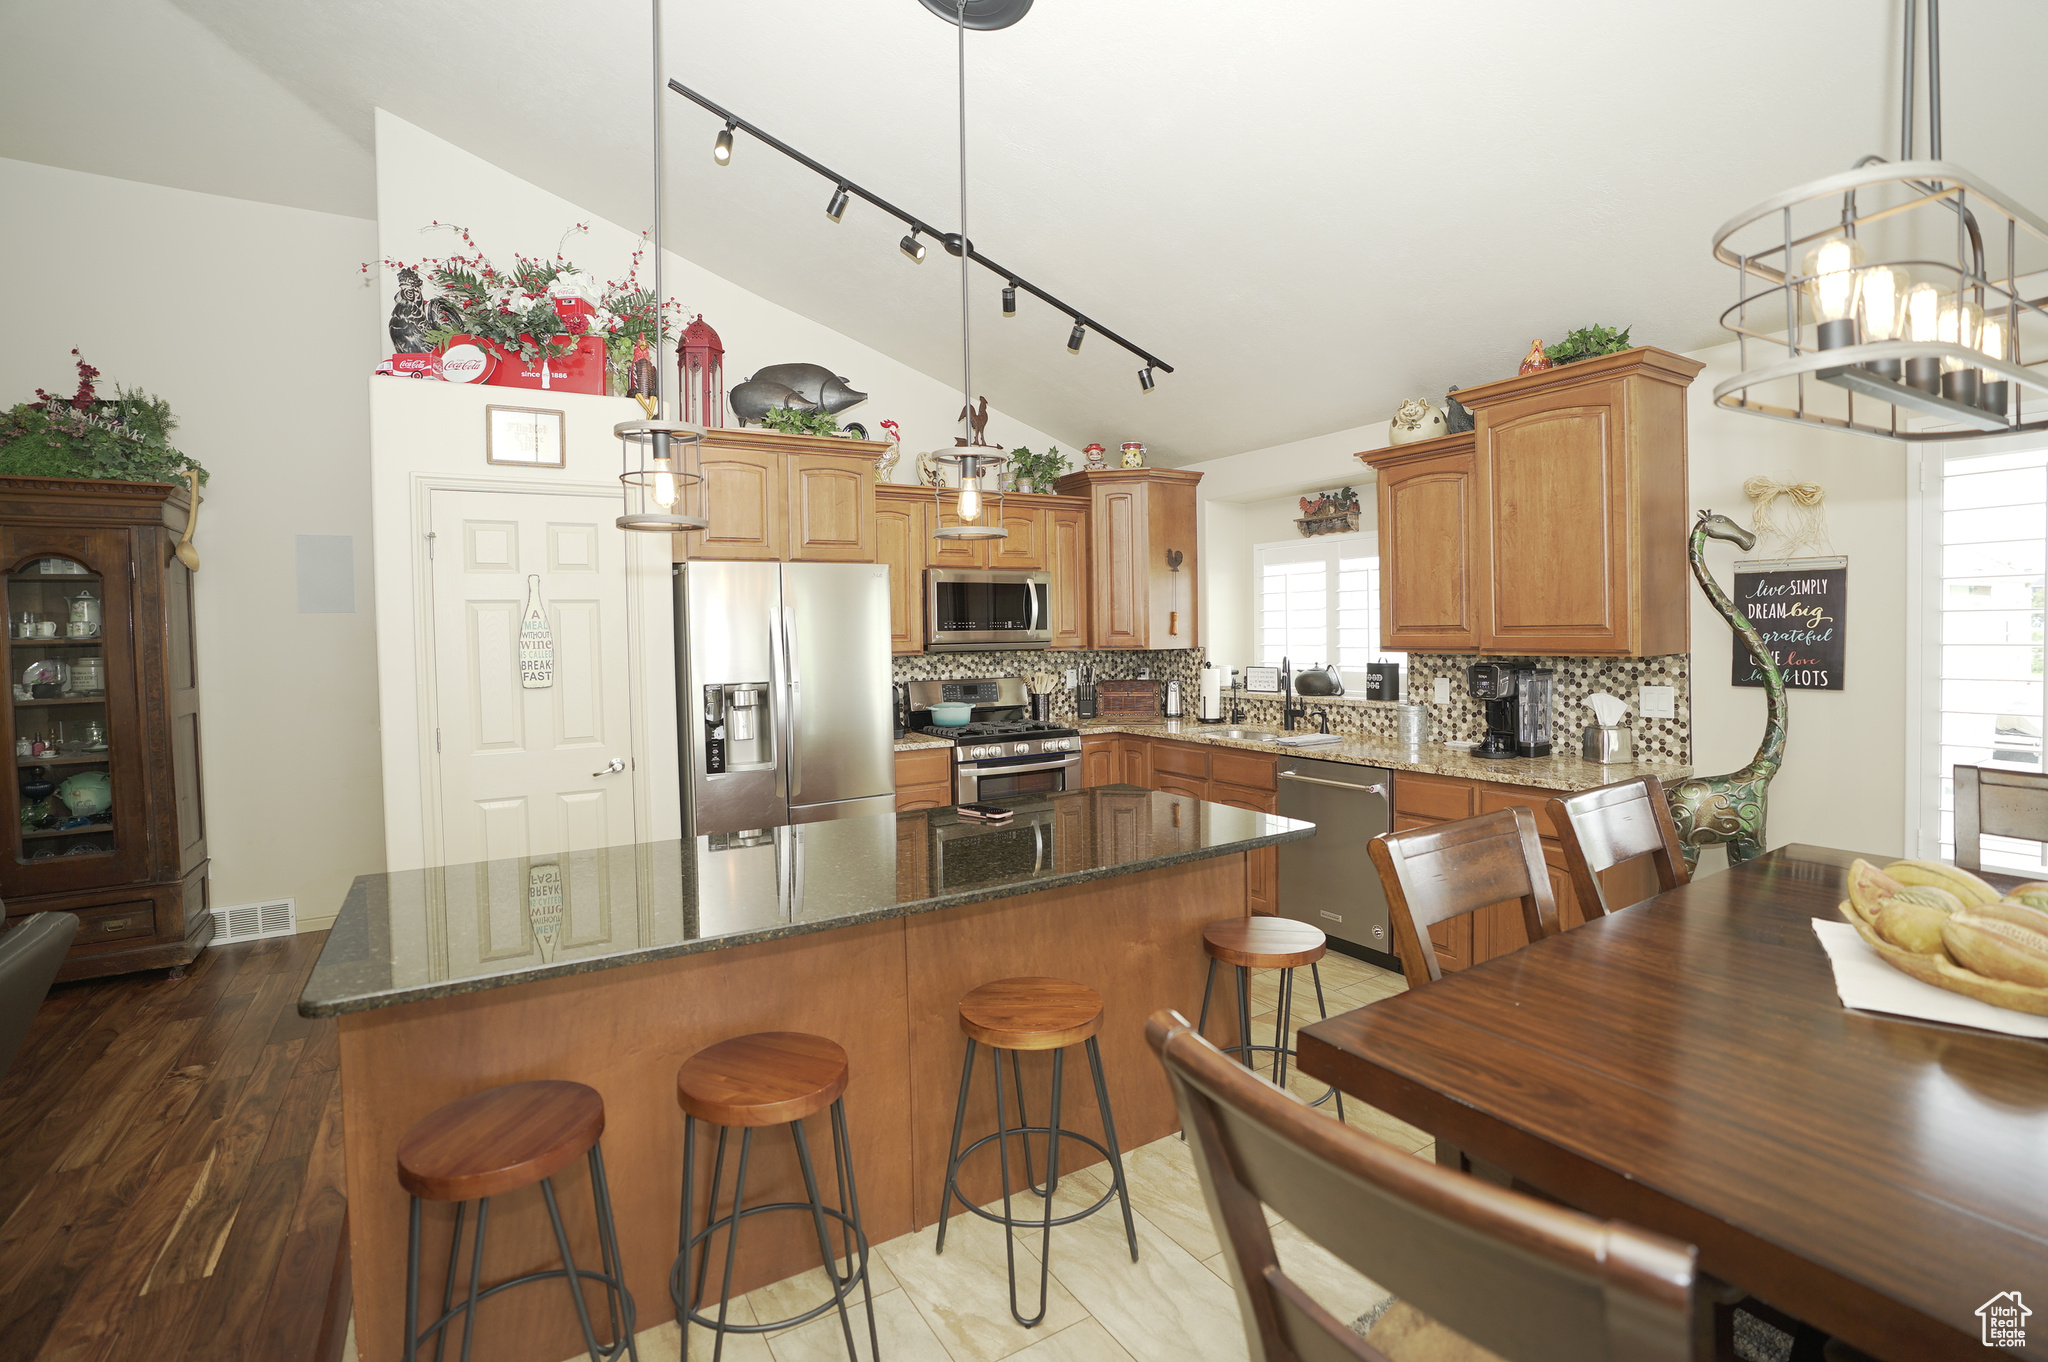 Kitchen featuring rail lighting, backsplash, stainless steel appliances, sink, and lofted ceiling